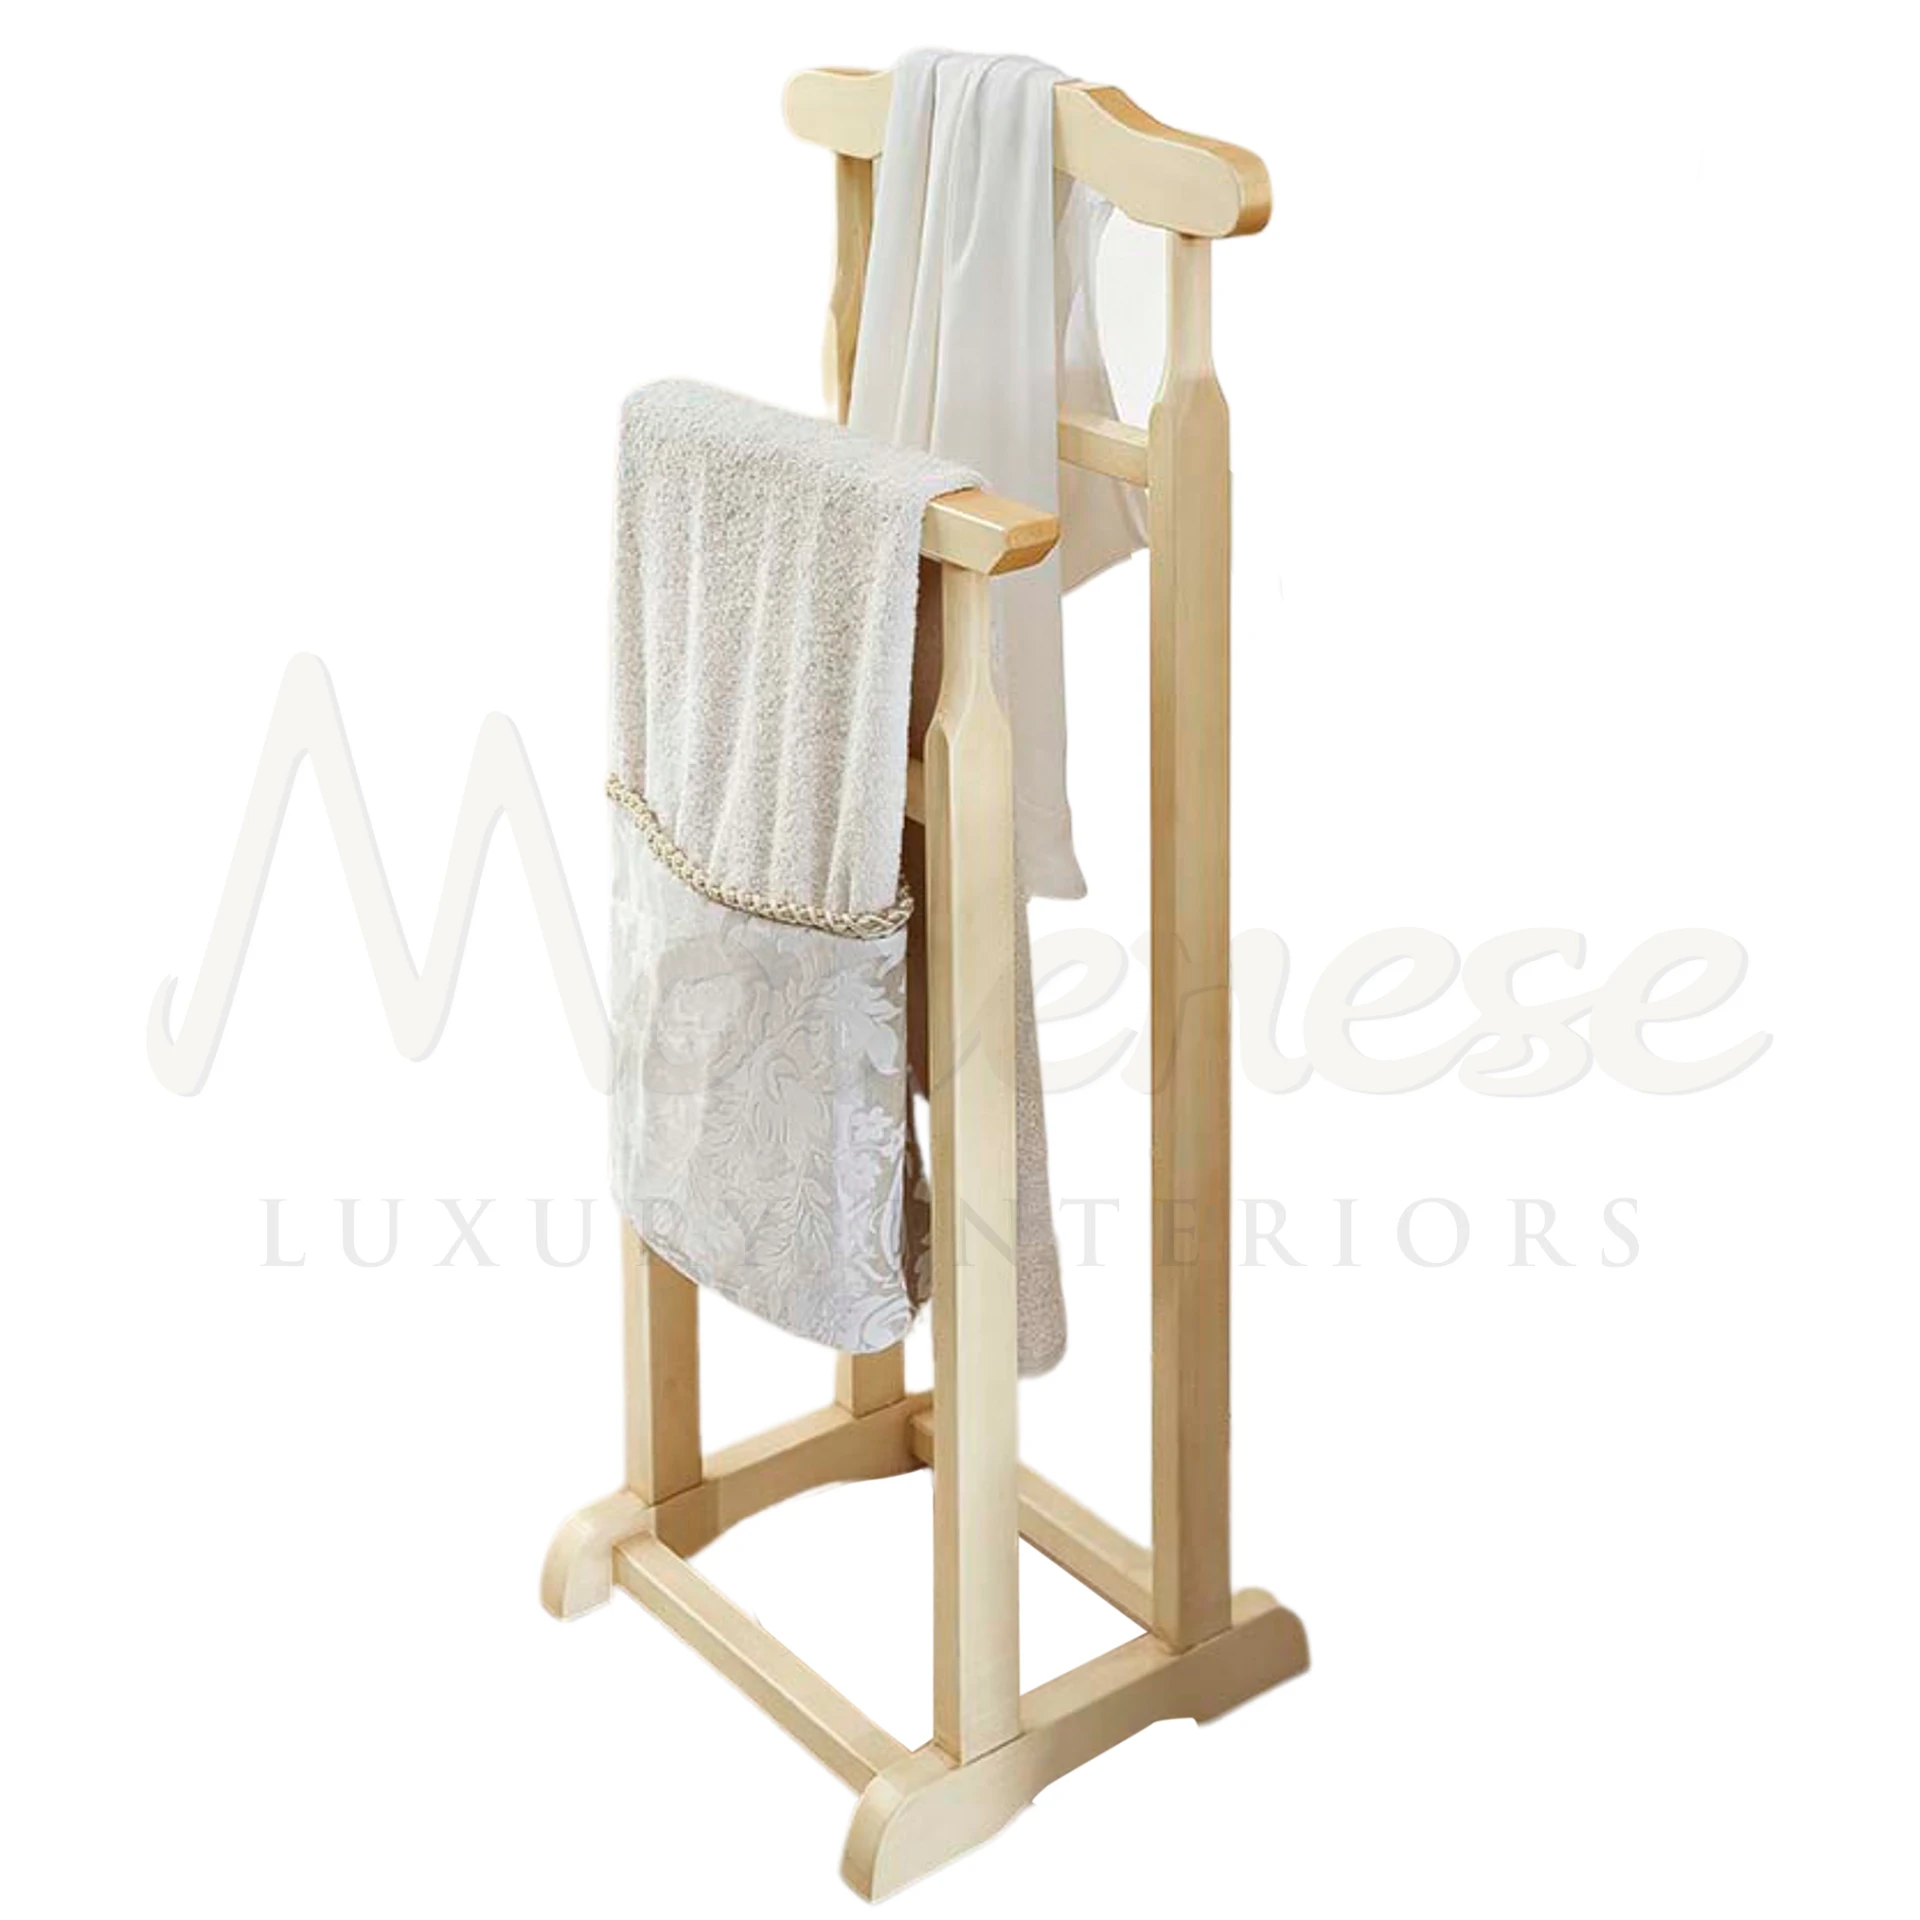 Valet stand in victorian style for luxury elegant bathrooms